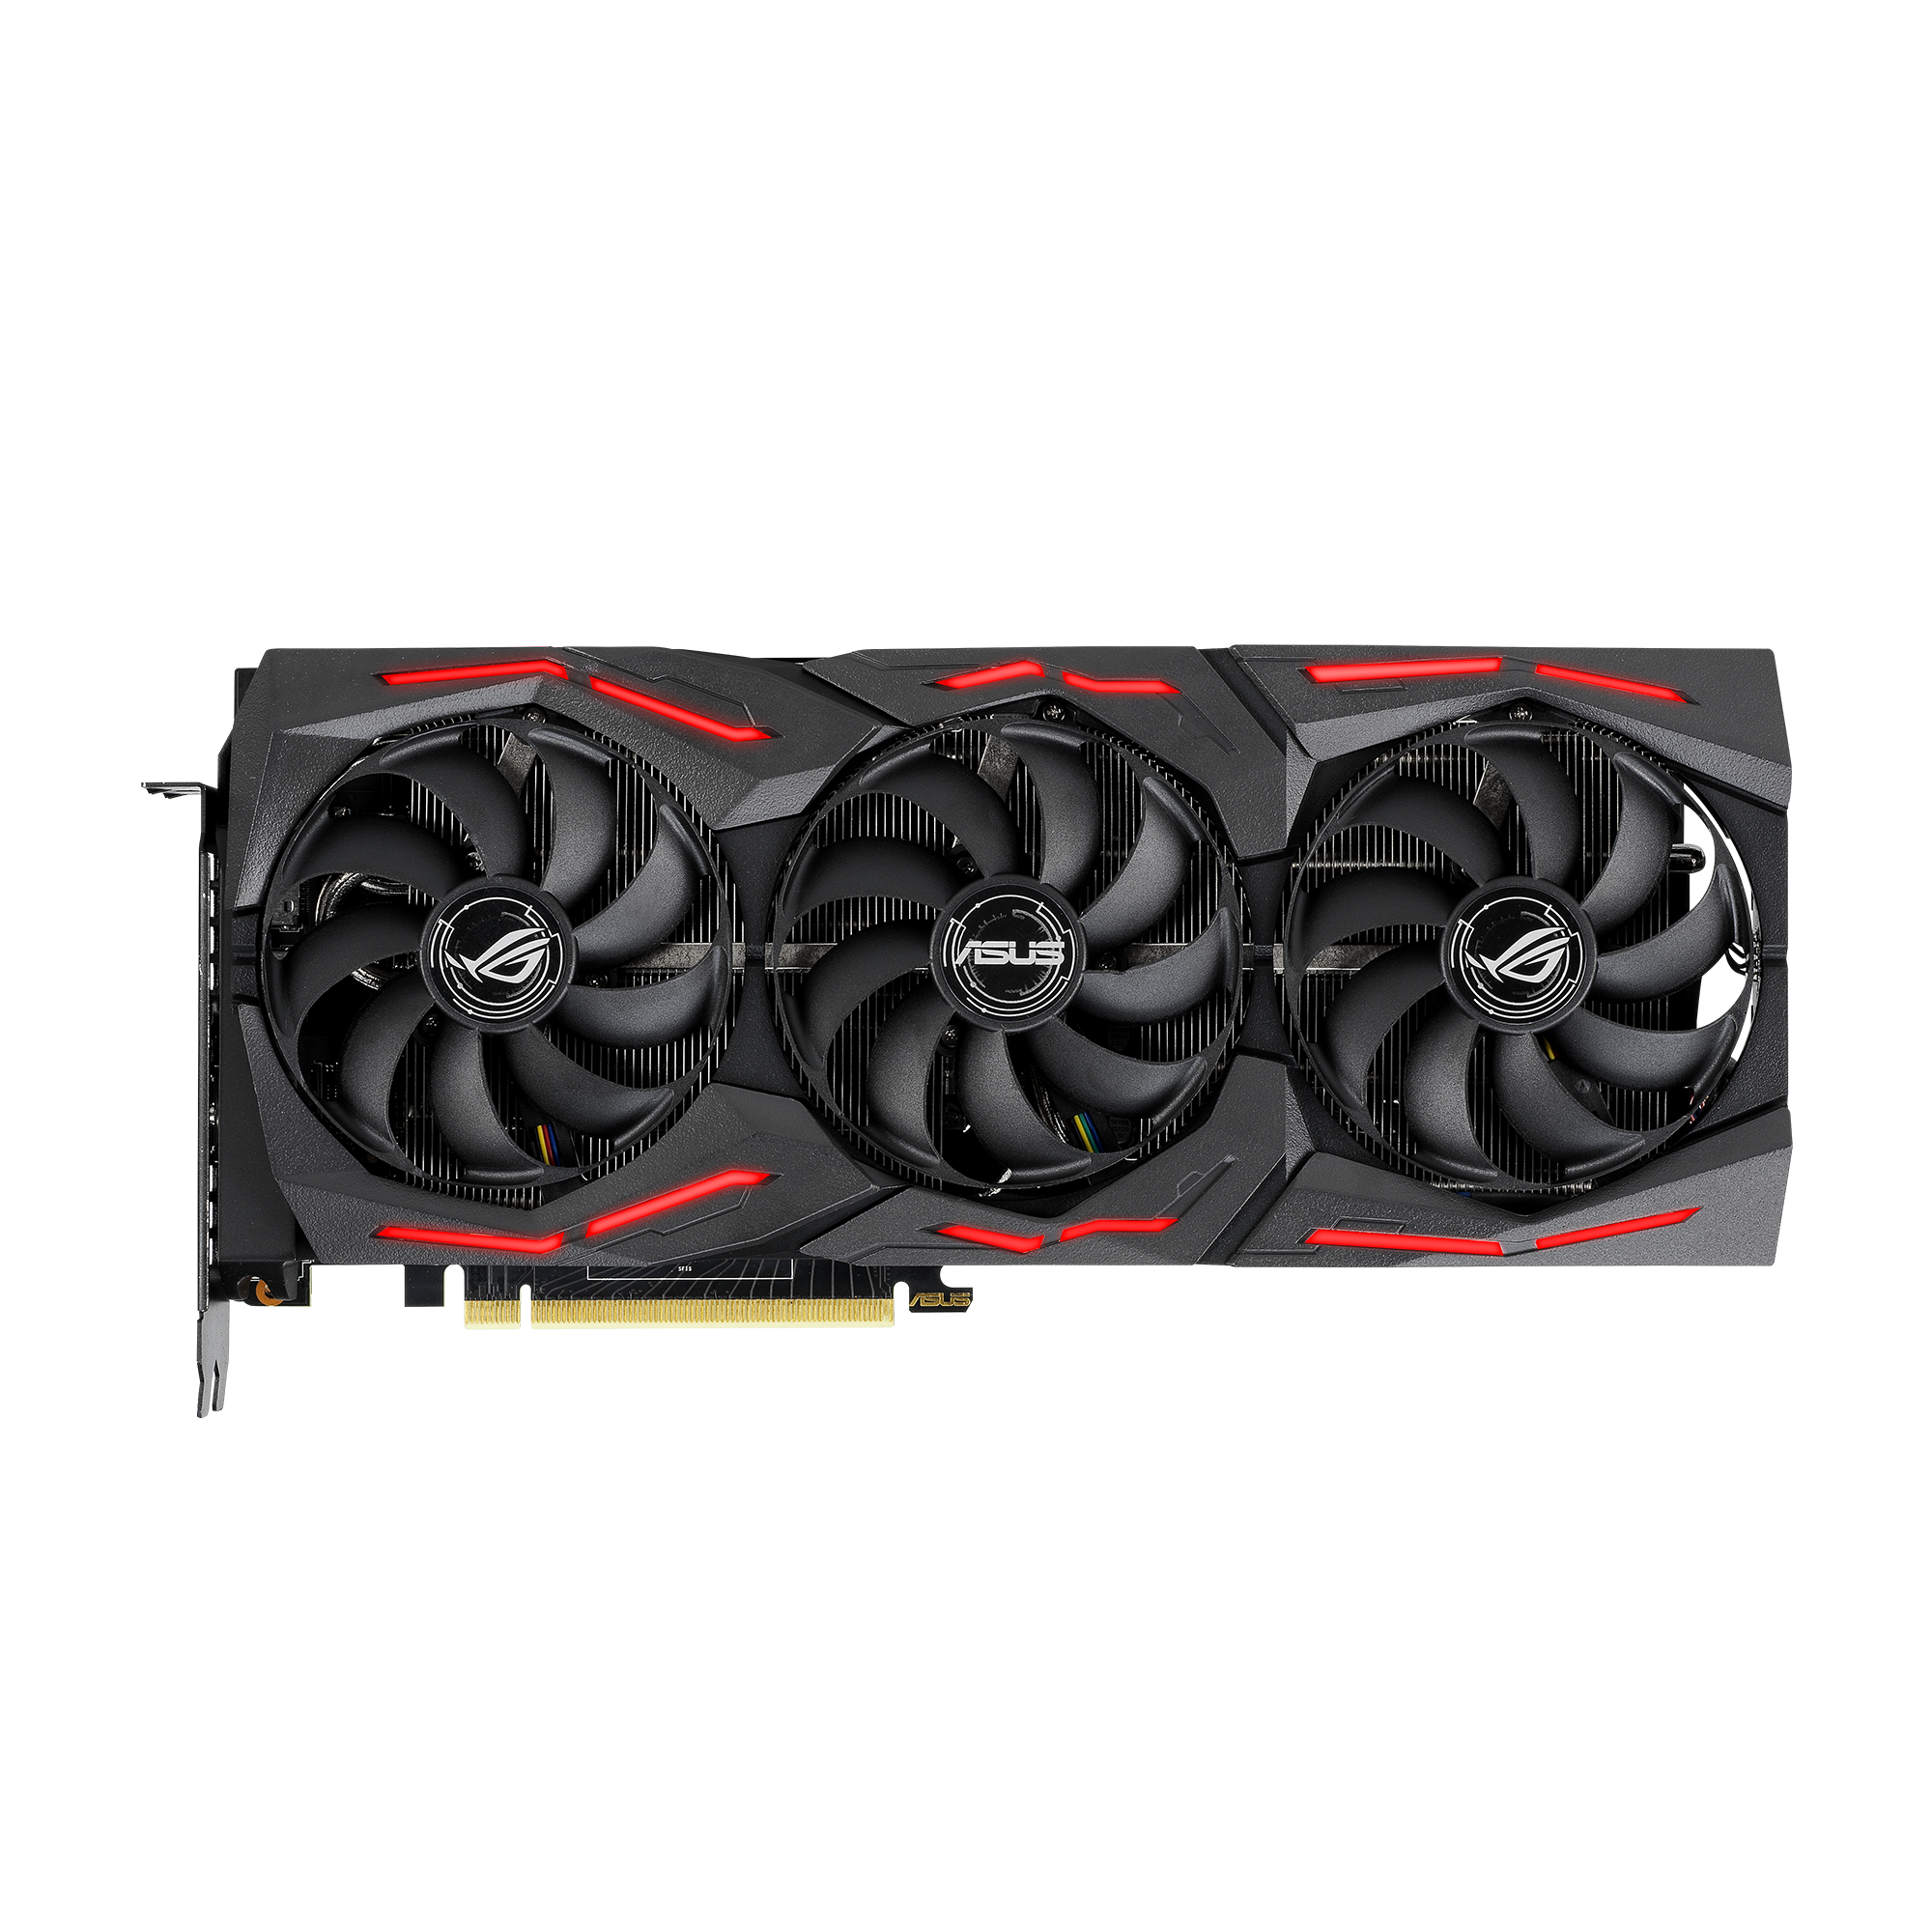 ROG-STRIX-RTX2080S-A8G-GAMING | Gaming graphics-cards｜ROG